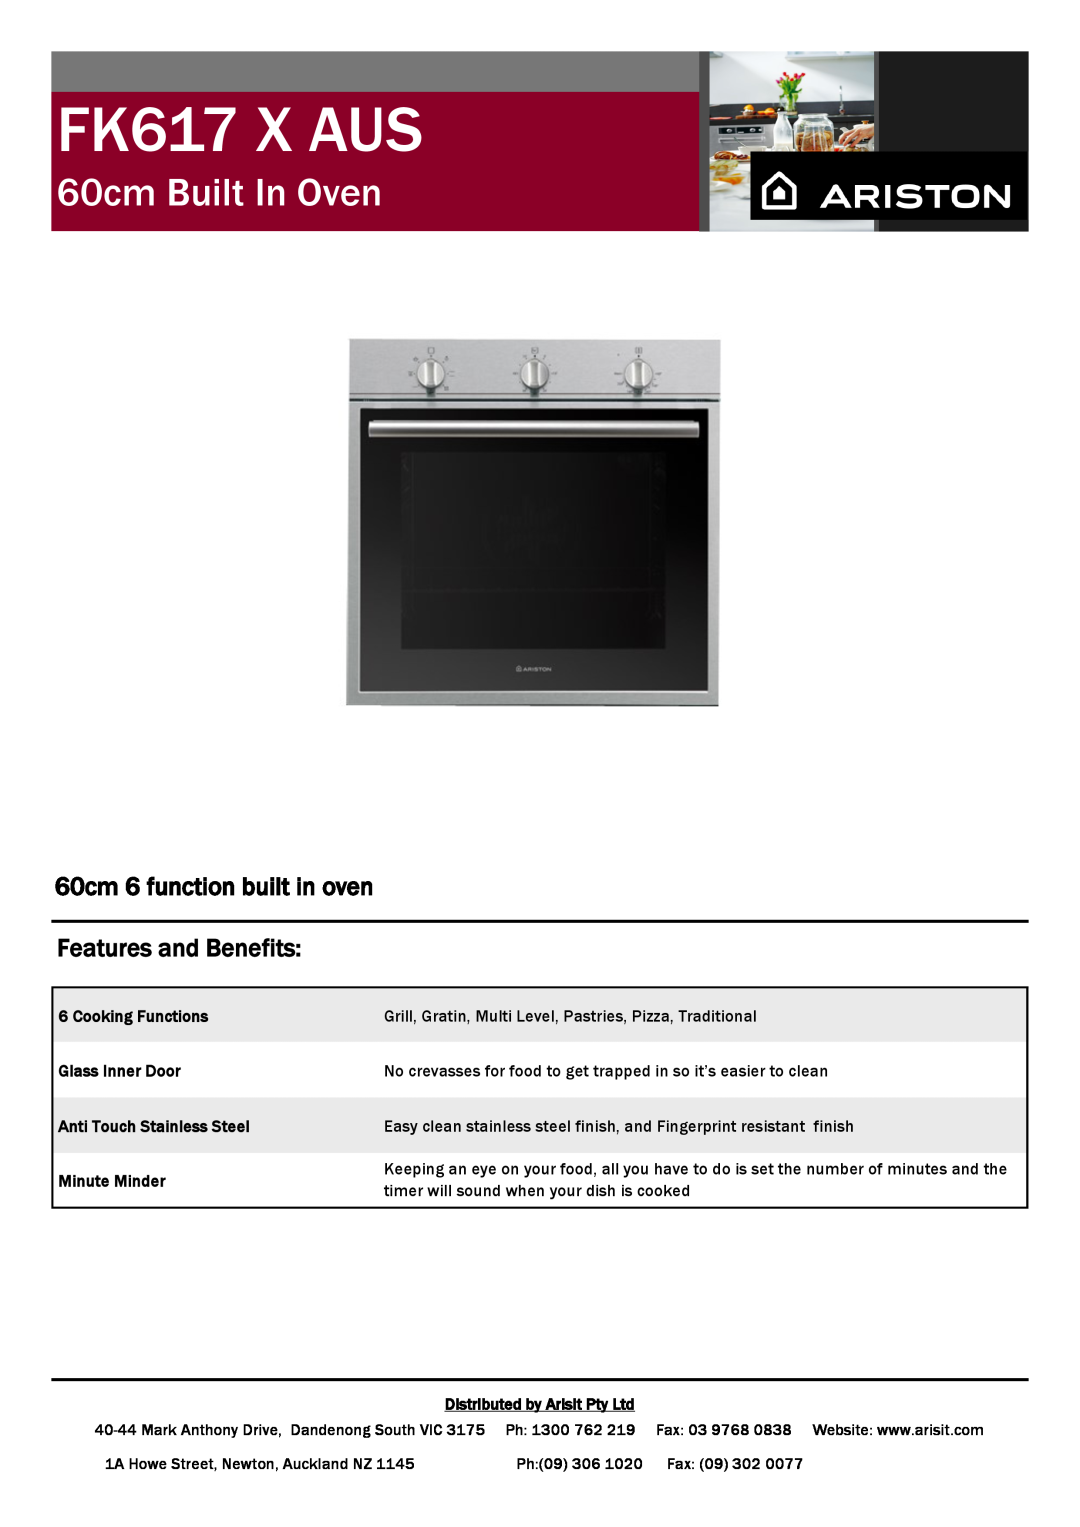 Ariston FK617 X AUS manual 60cm Built In Oven, 60cm 6 function built in oven, Features and Benefits 